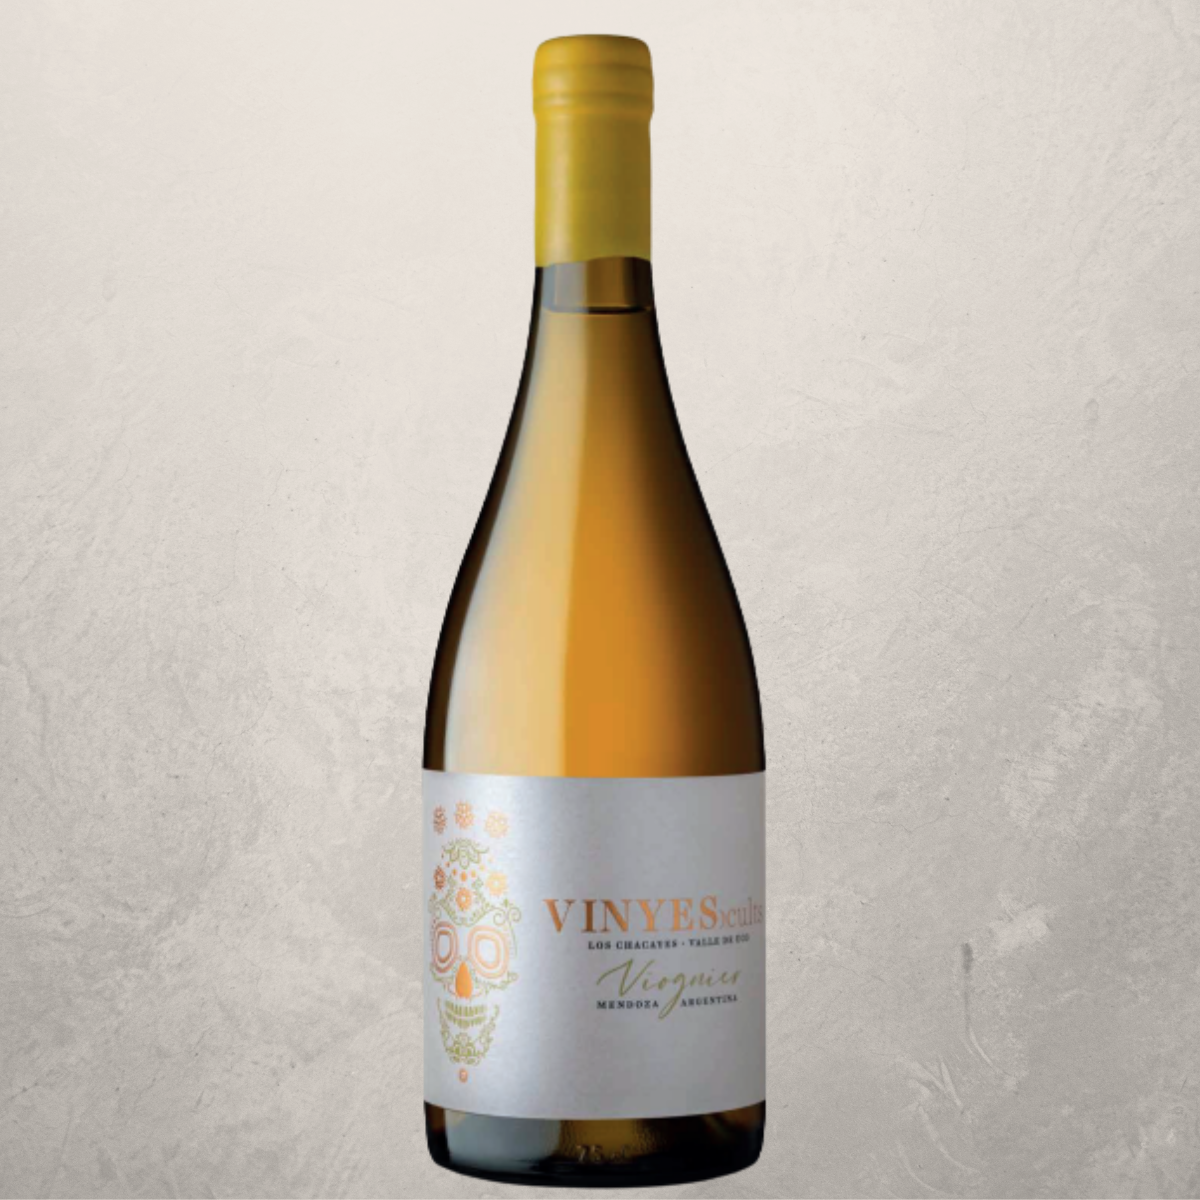 viognier wine from argentina in Germany